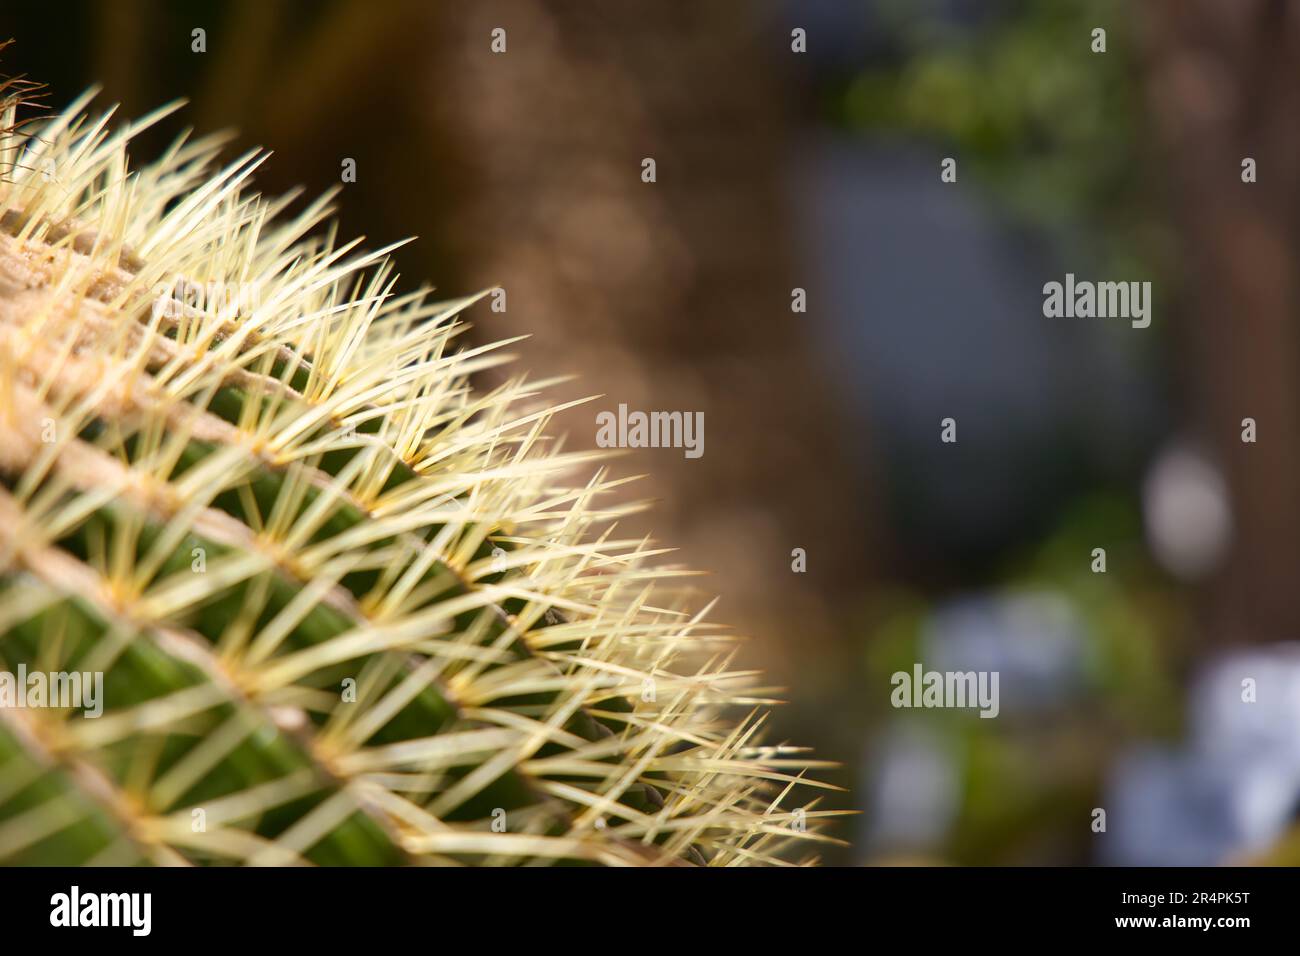 Golden barrel cactus with blurry background Stock Photo